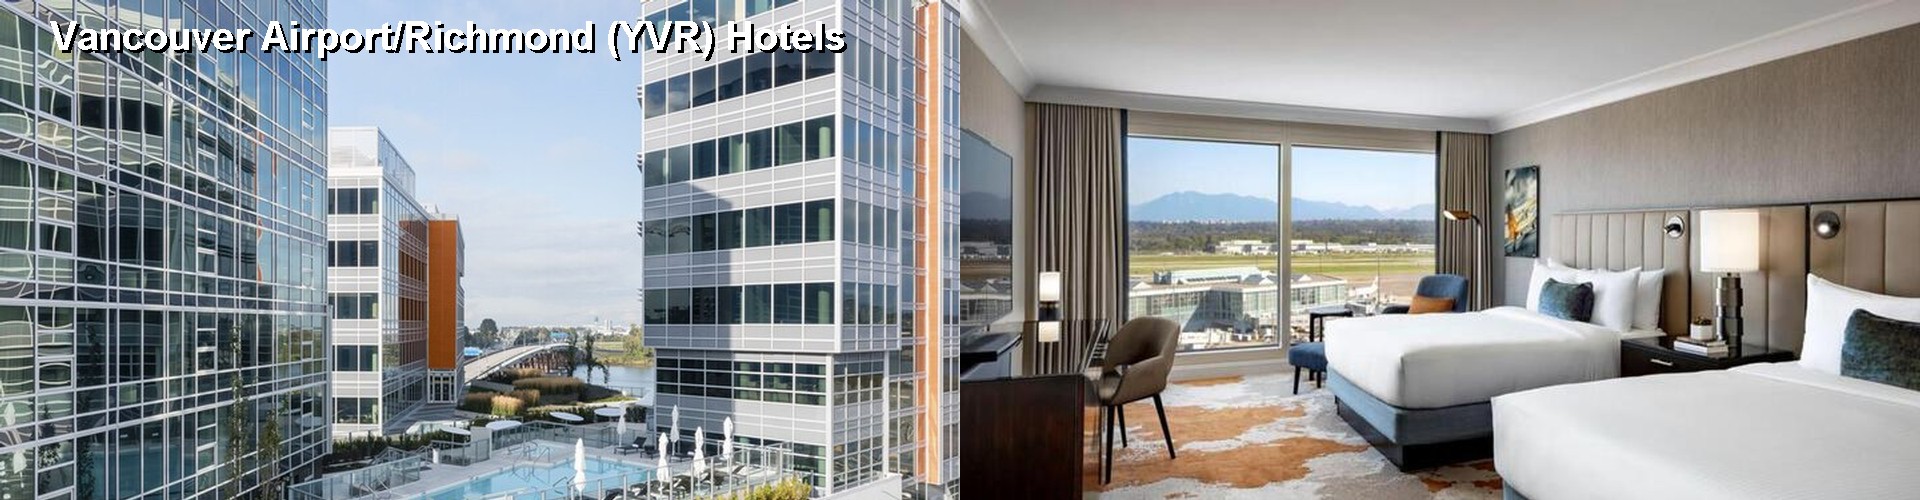 5 Best Hotels near Vancouver Airport/Richmond (YVR)